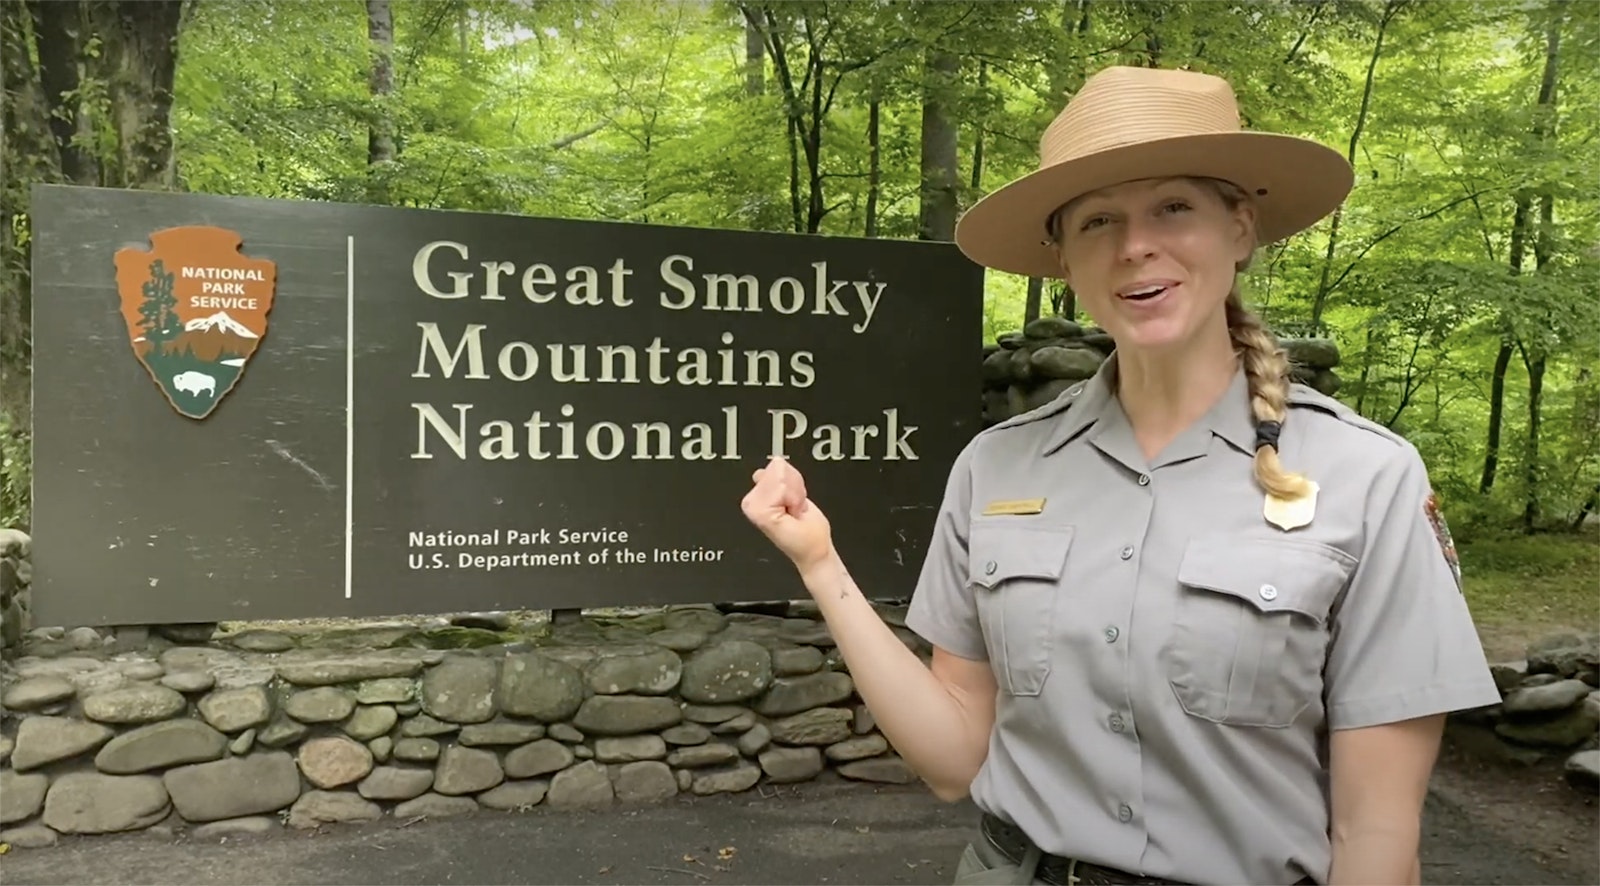 A park ranger points to a sign for Great Smoky Mountains National Park